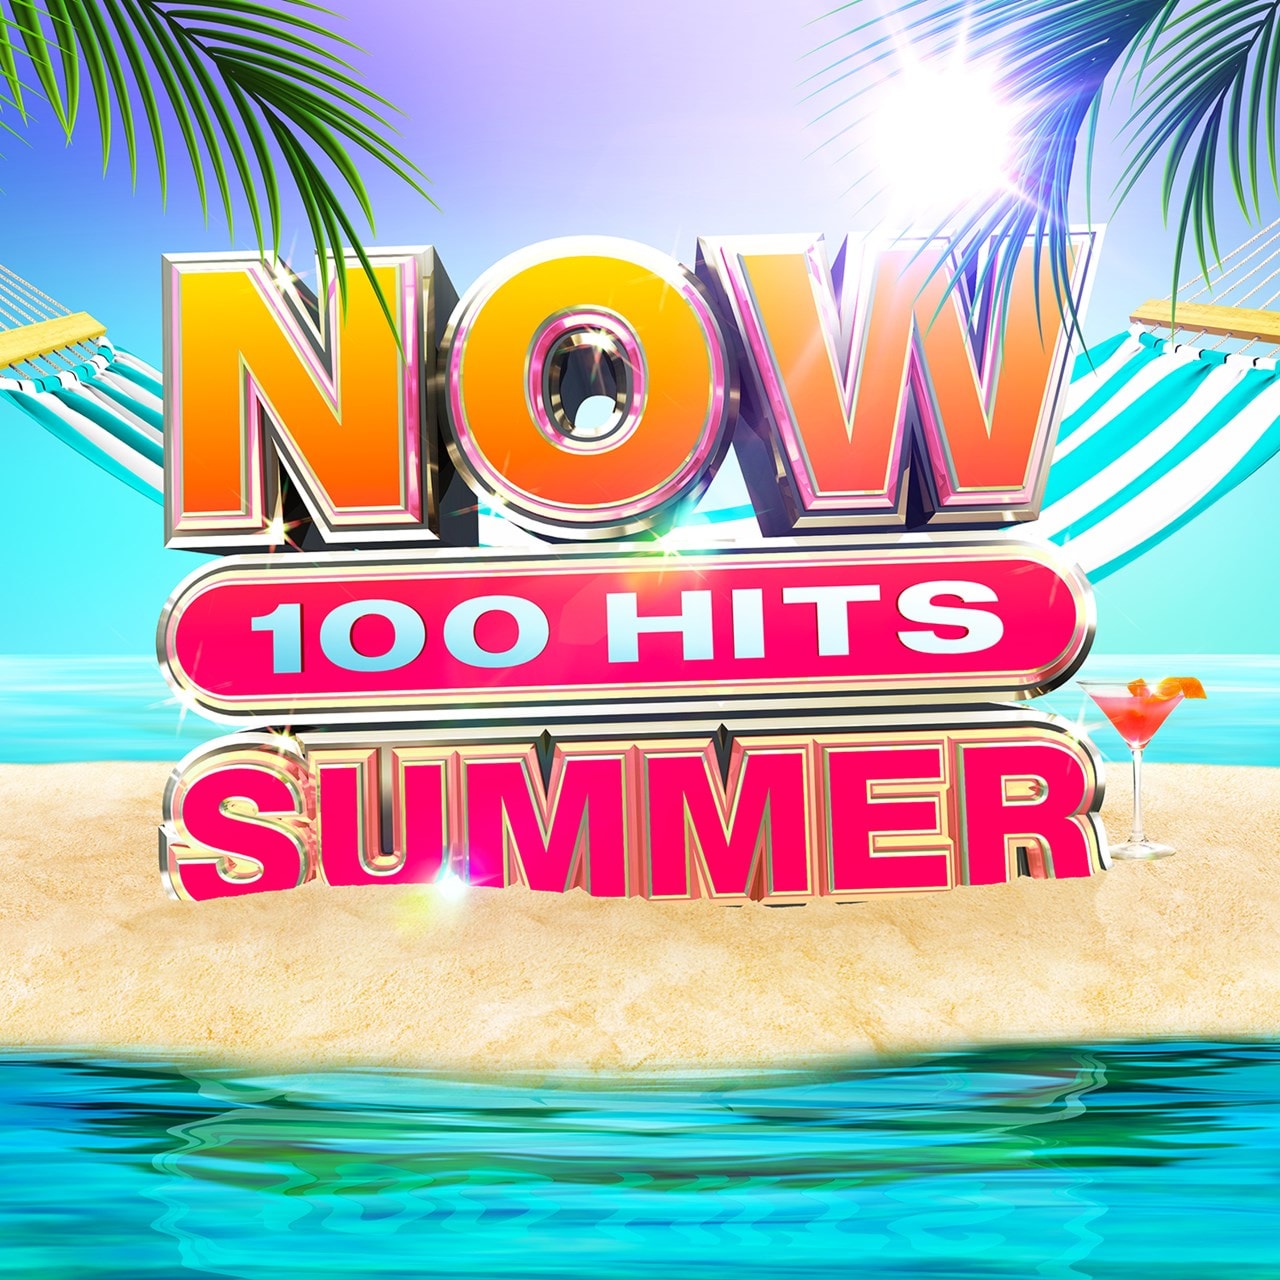 Now 100 Hits Summer CD Box Set Free shipping over £20 HMV Store